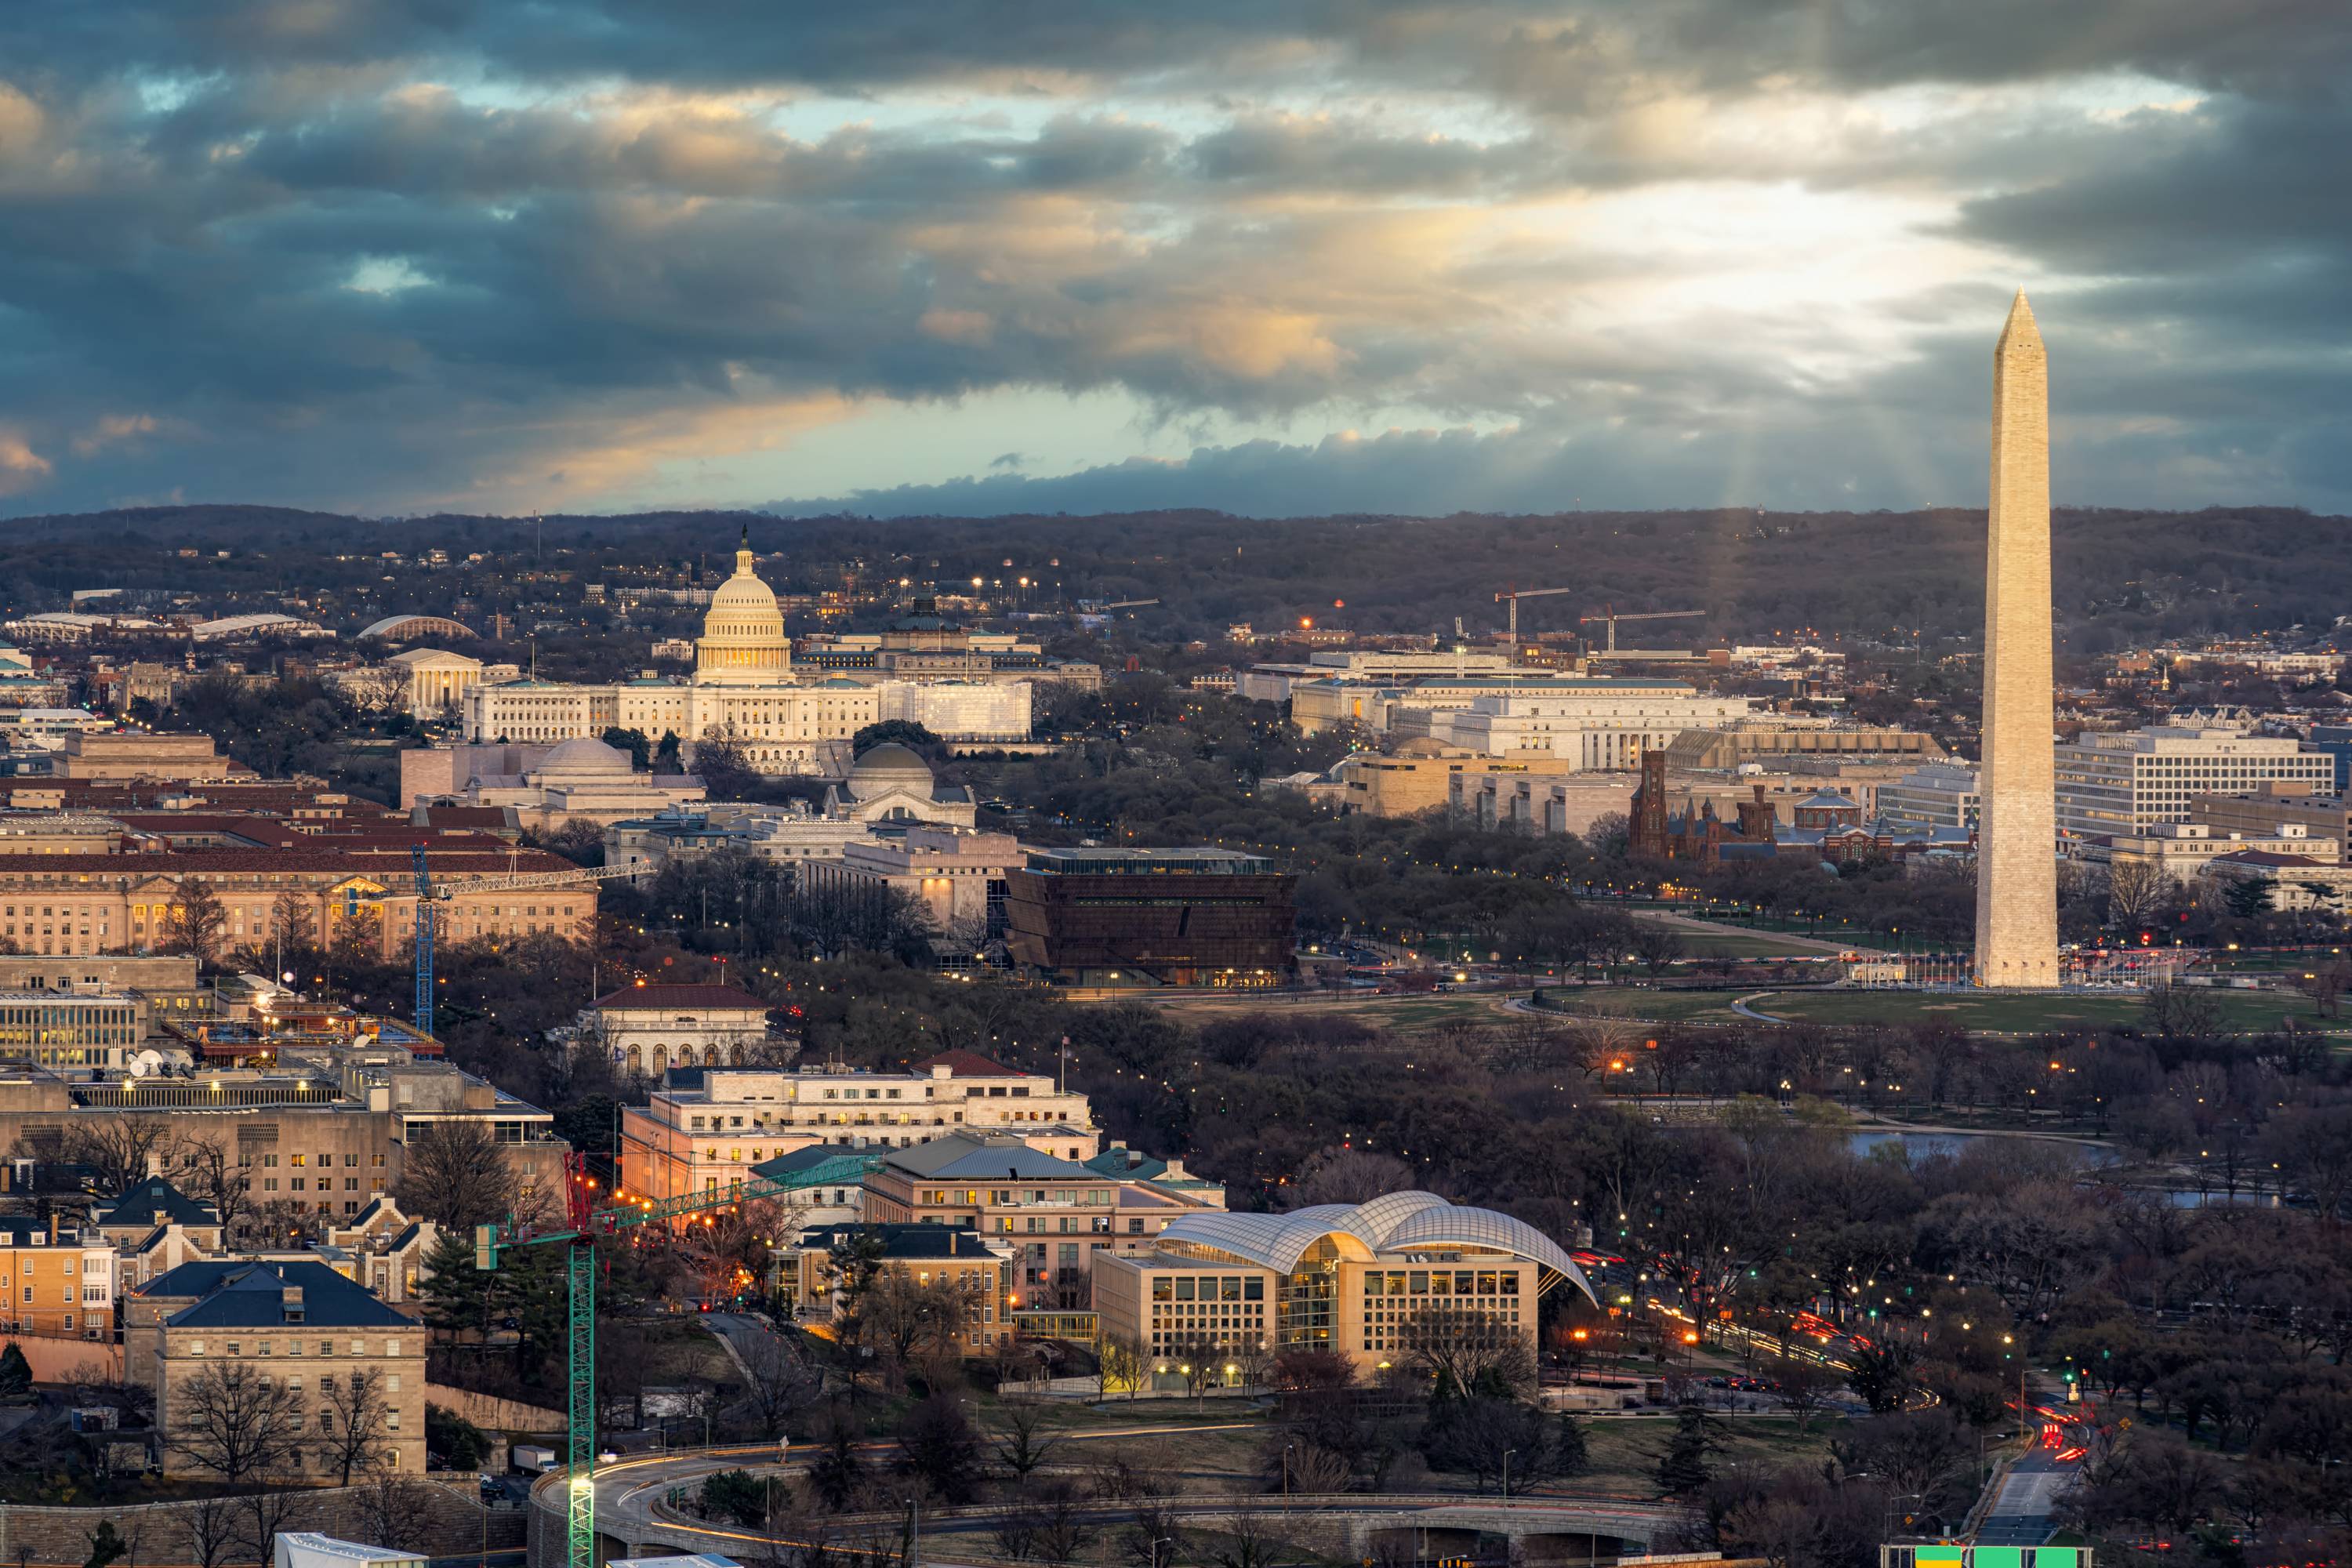 downtown and capitol view of Washington, DC image